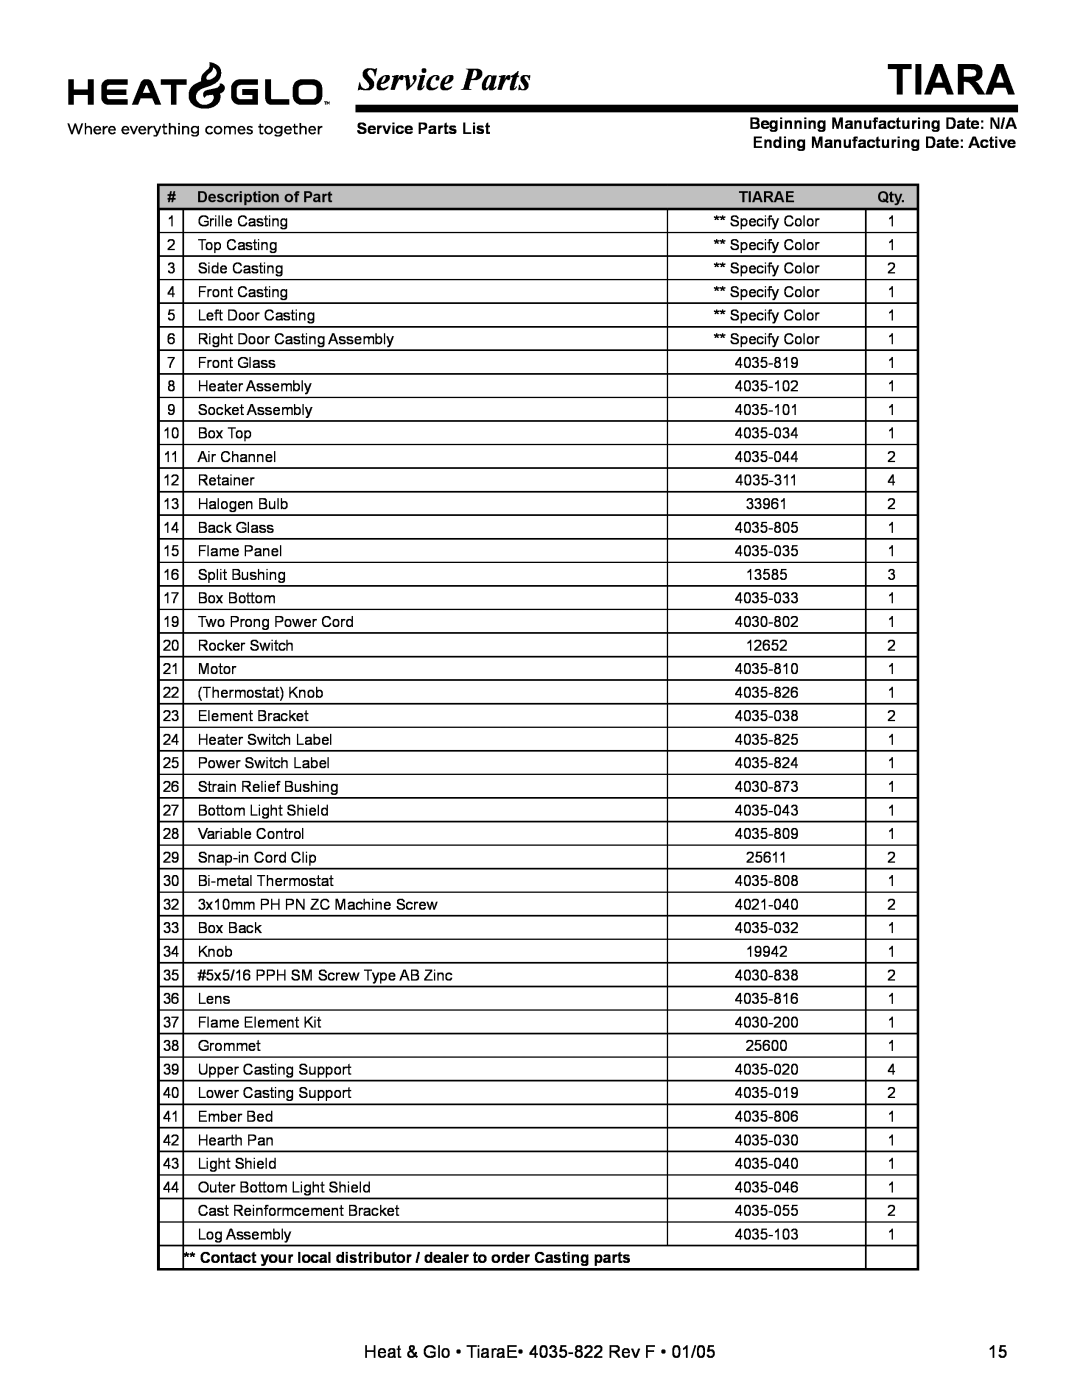 Heat & Glo LifeStyle TiaraE 4035-822 manual Service Parts List, Beginning Manufacturing Date N/A, # Description of Part 